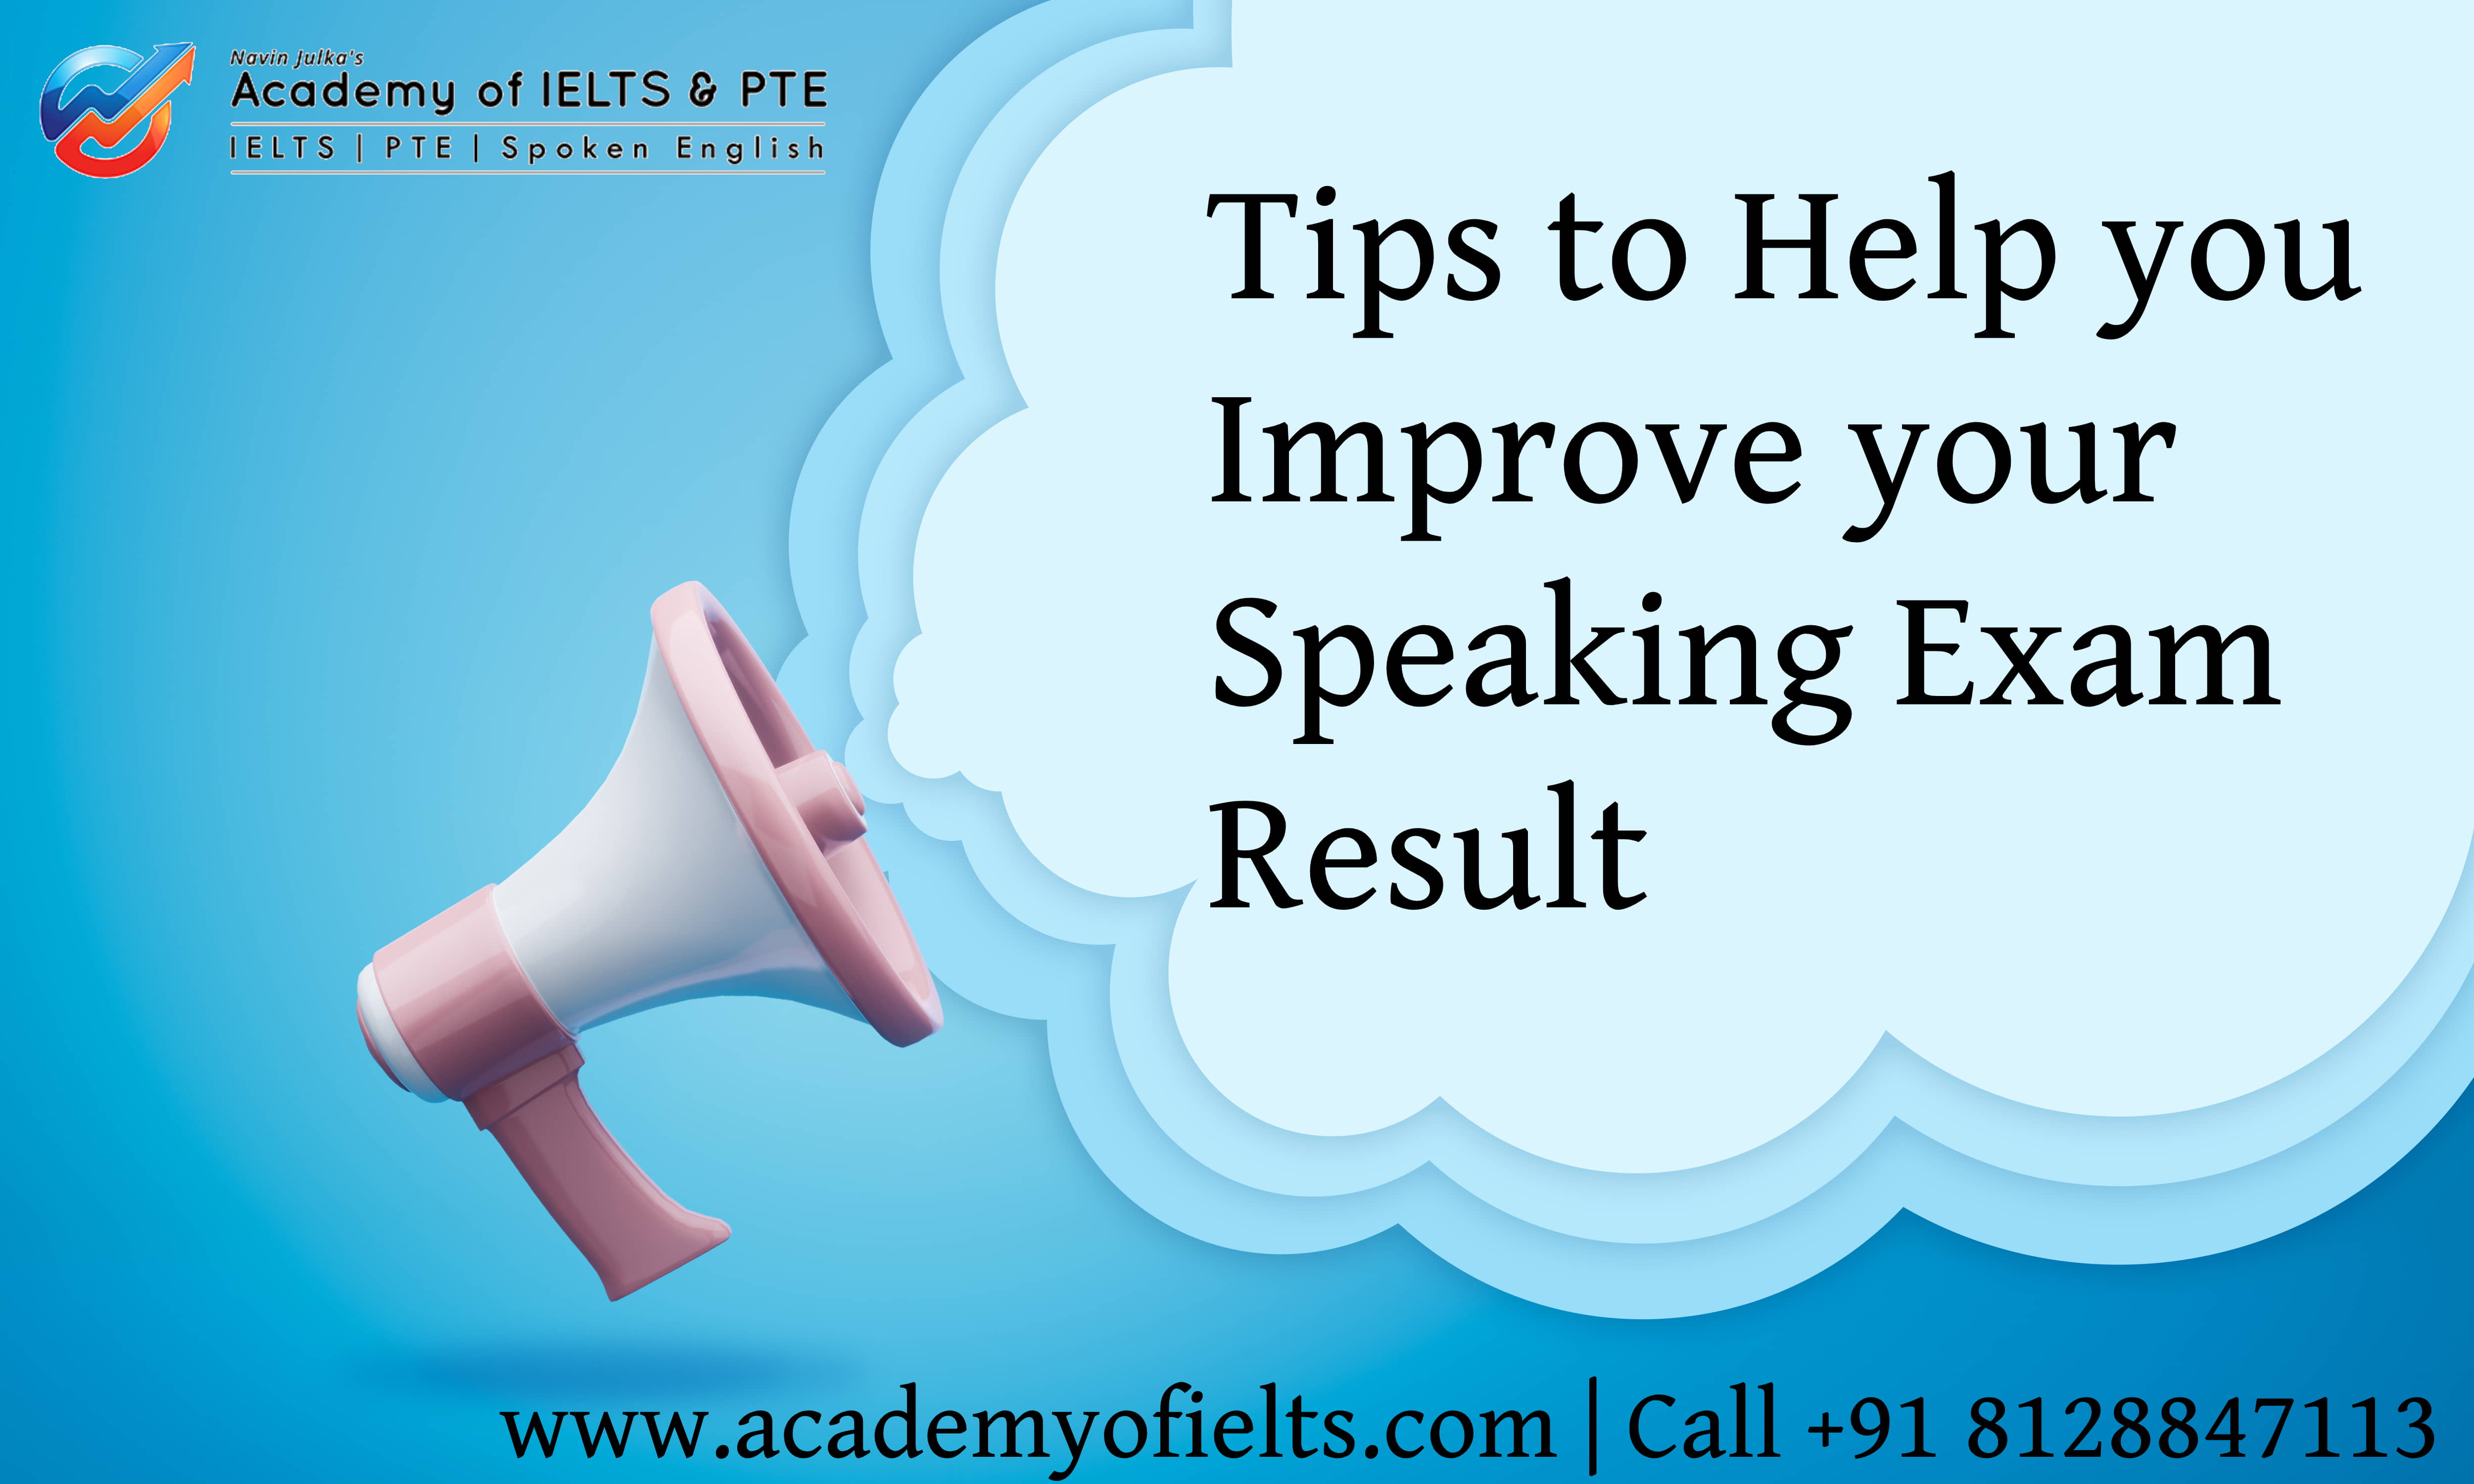 Tips to Help you Improve your Speaking Exam Result